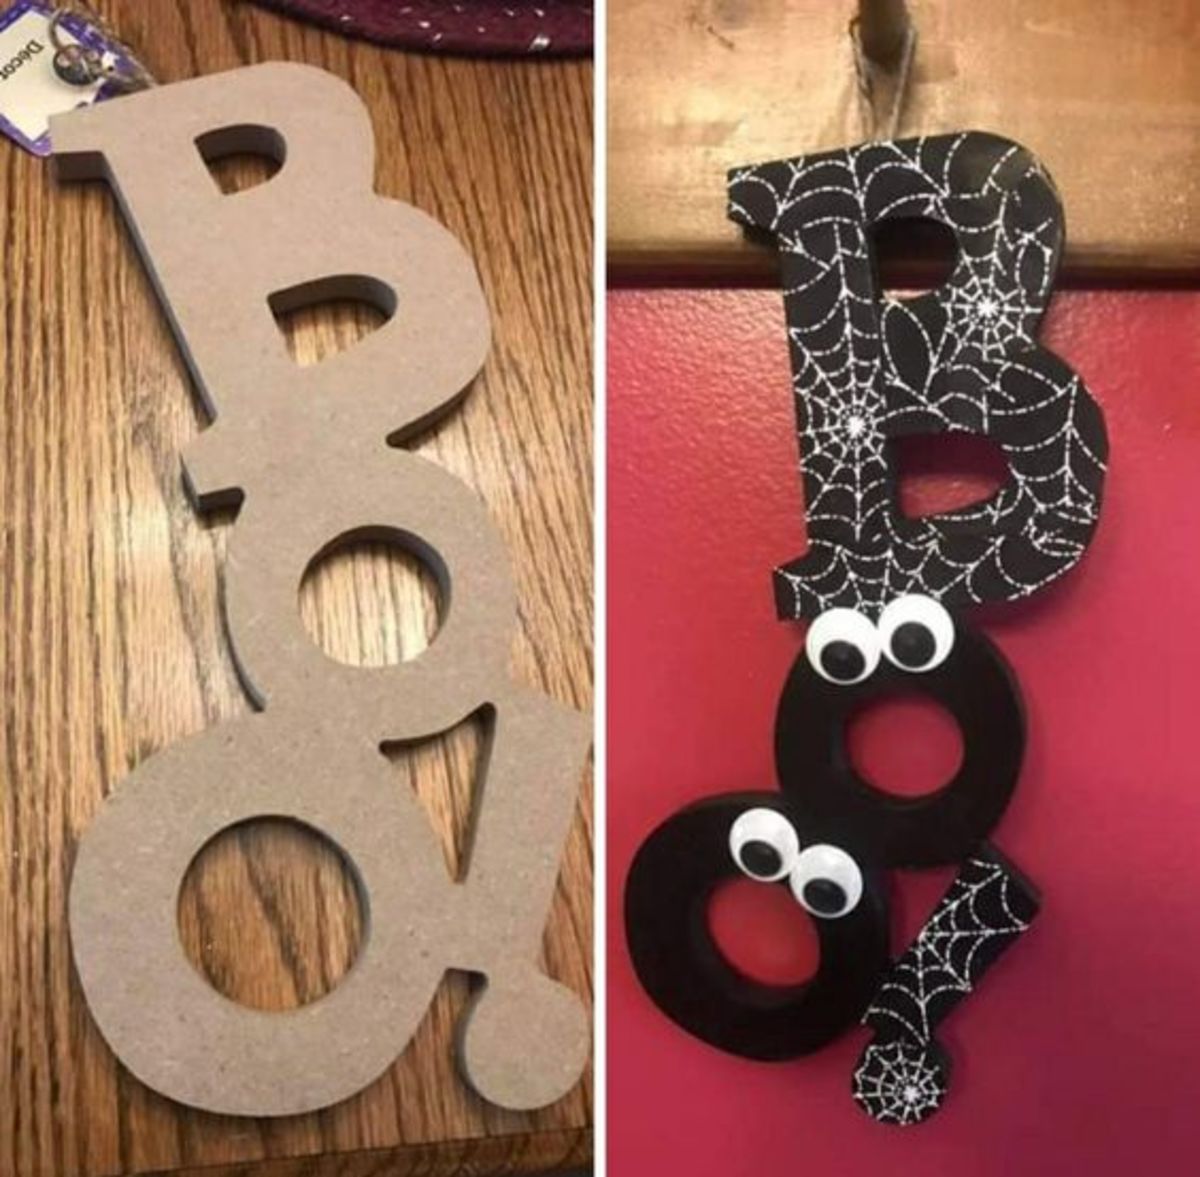 Spiderweb "Boo!" Sign (Before and After)